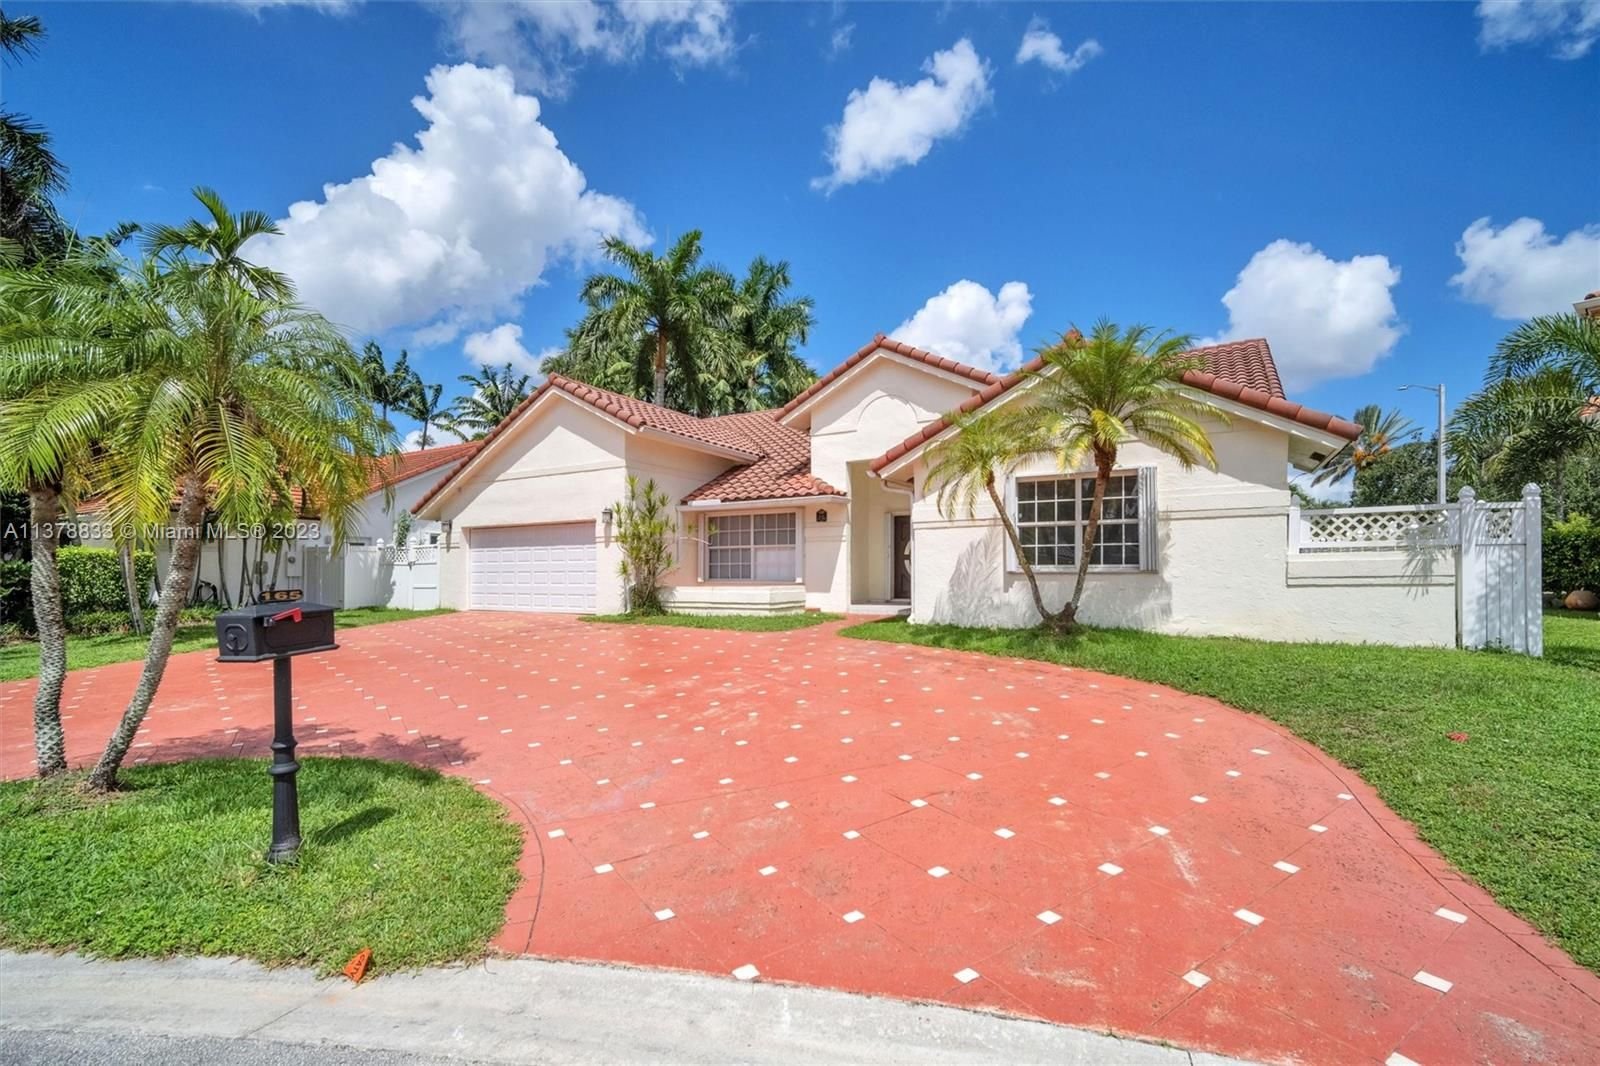 Real estate property located at 165 164th Ave, Broward County, Pembroke Pines, FL